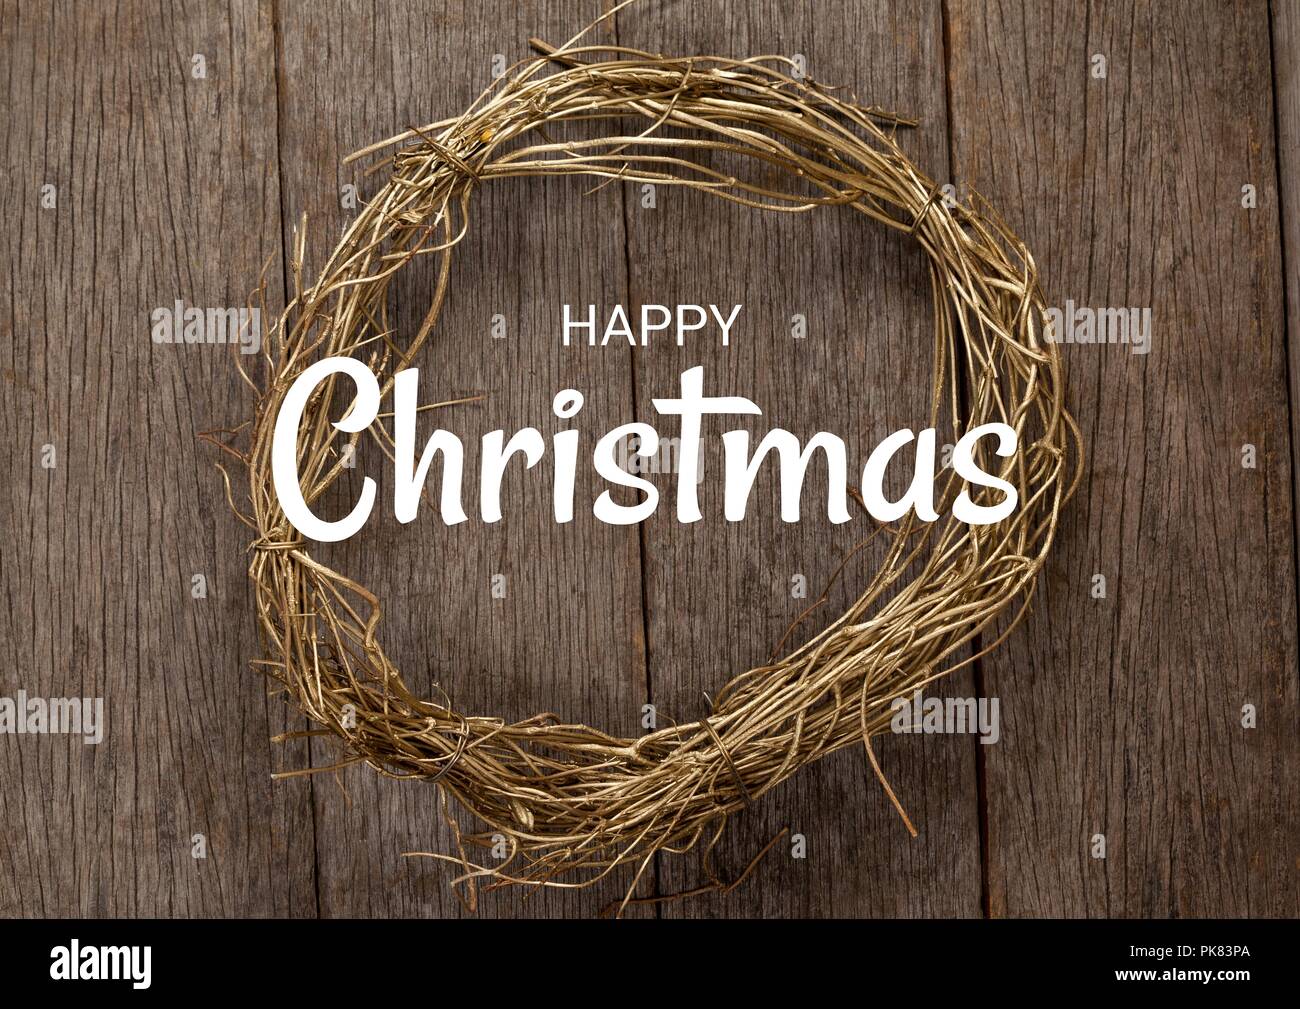 Happy Christmas text with wreath Stock Photo